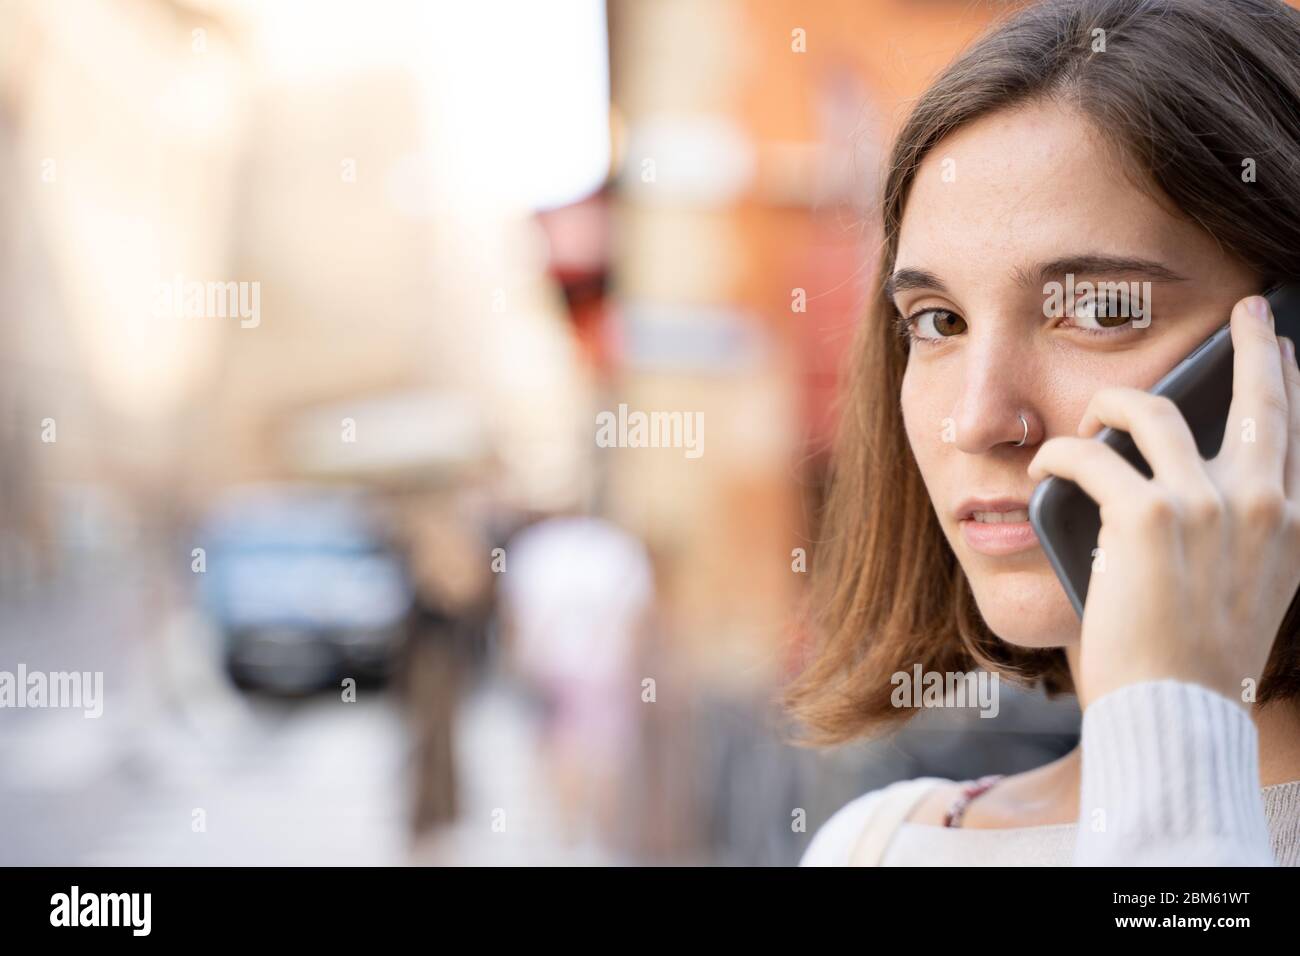 Young woman with half a mane and a pierced nose talking with a smartphone with worried expression on the street Stock Photo